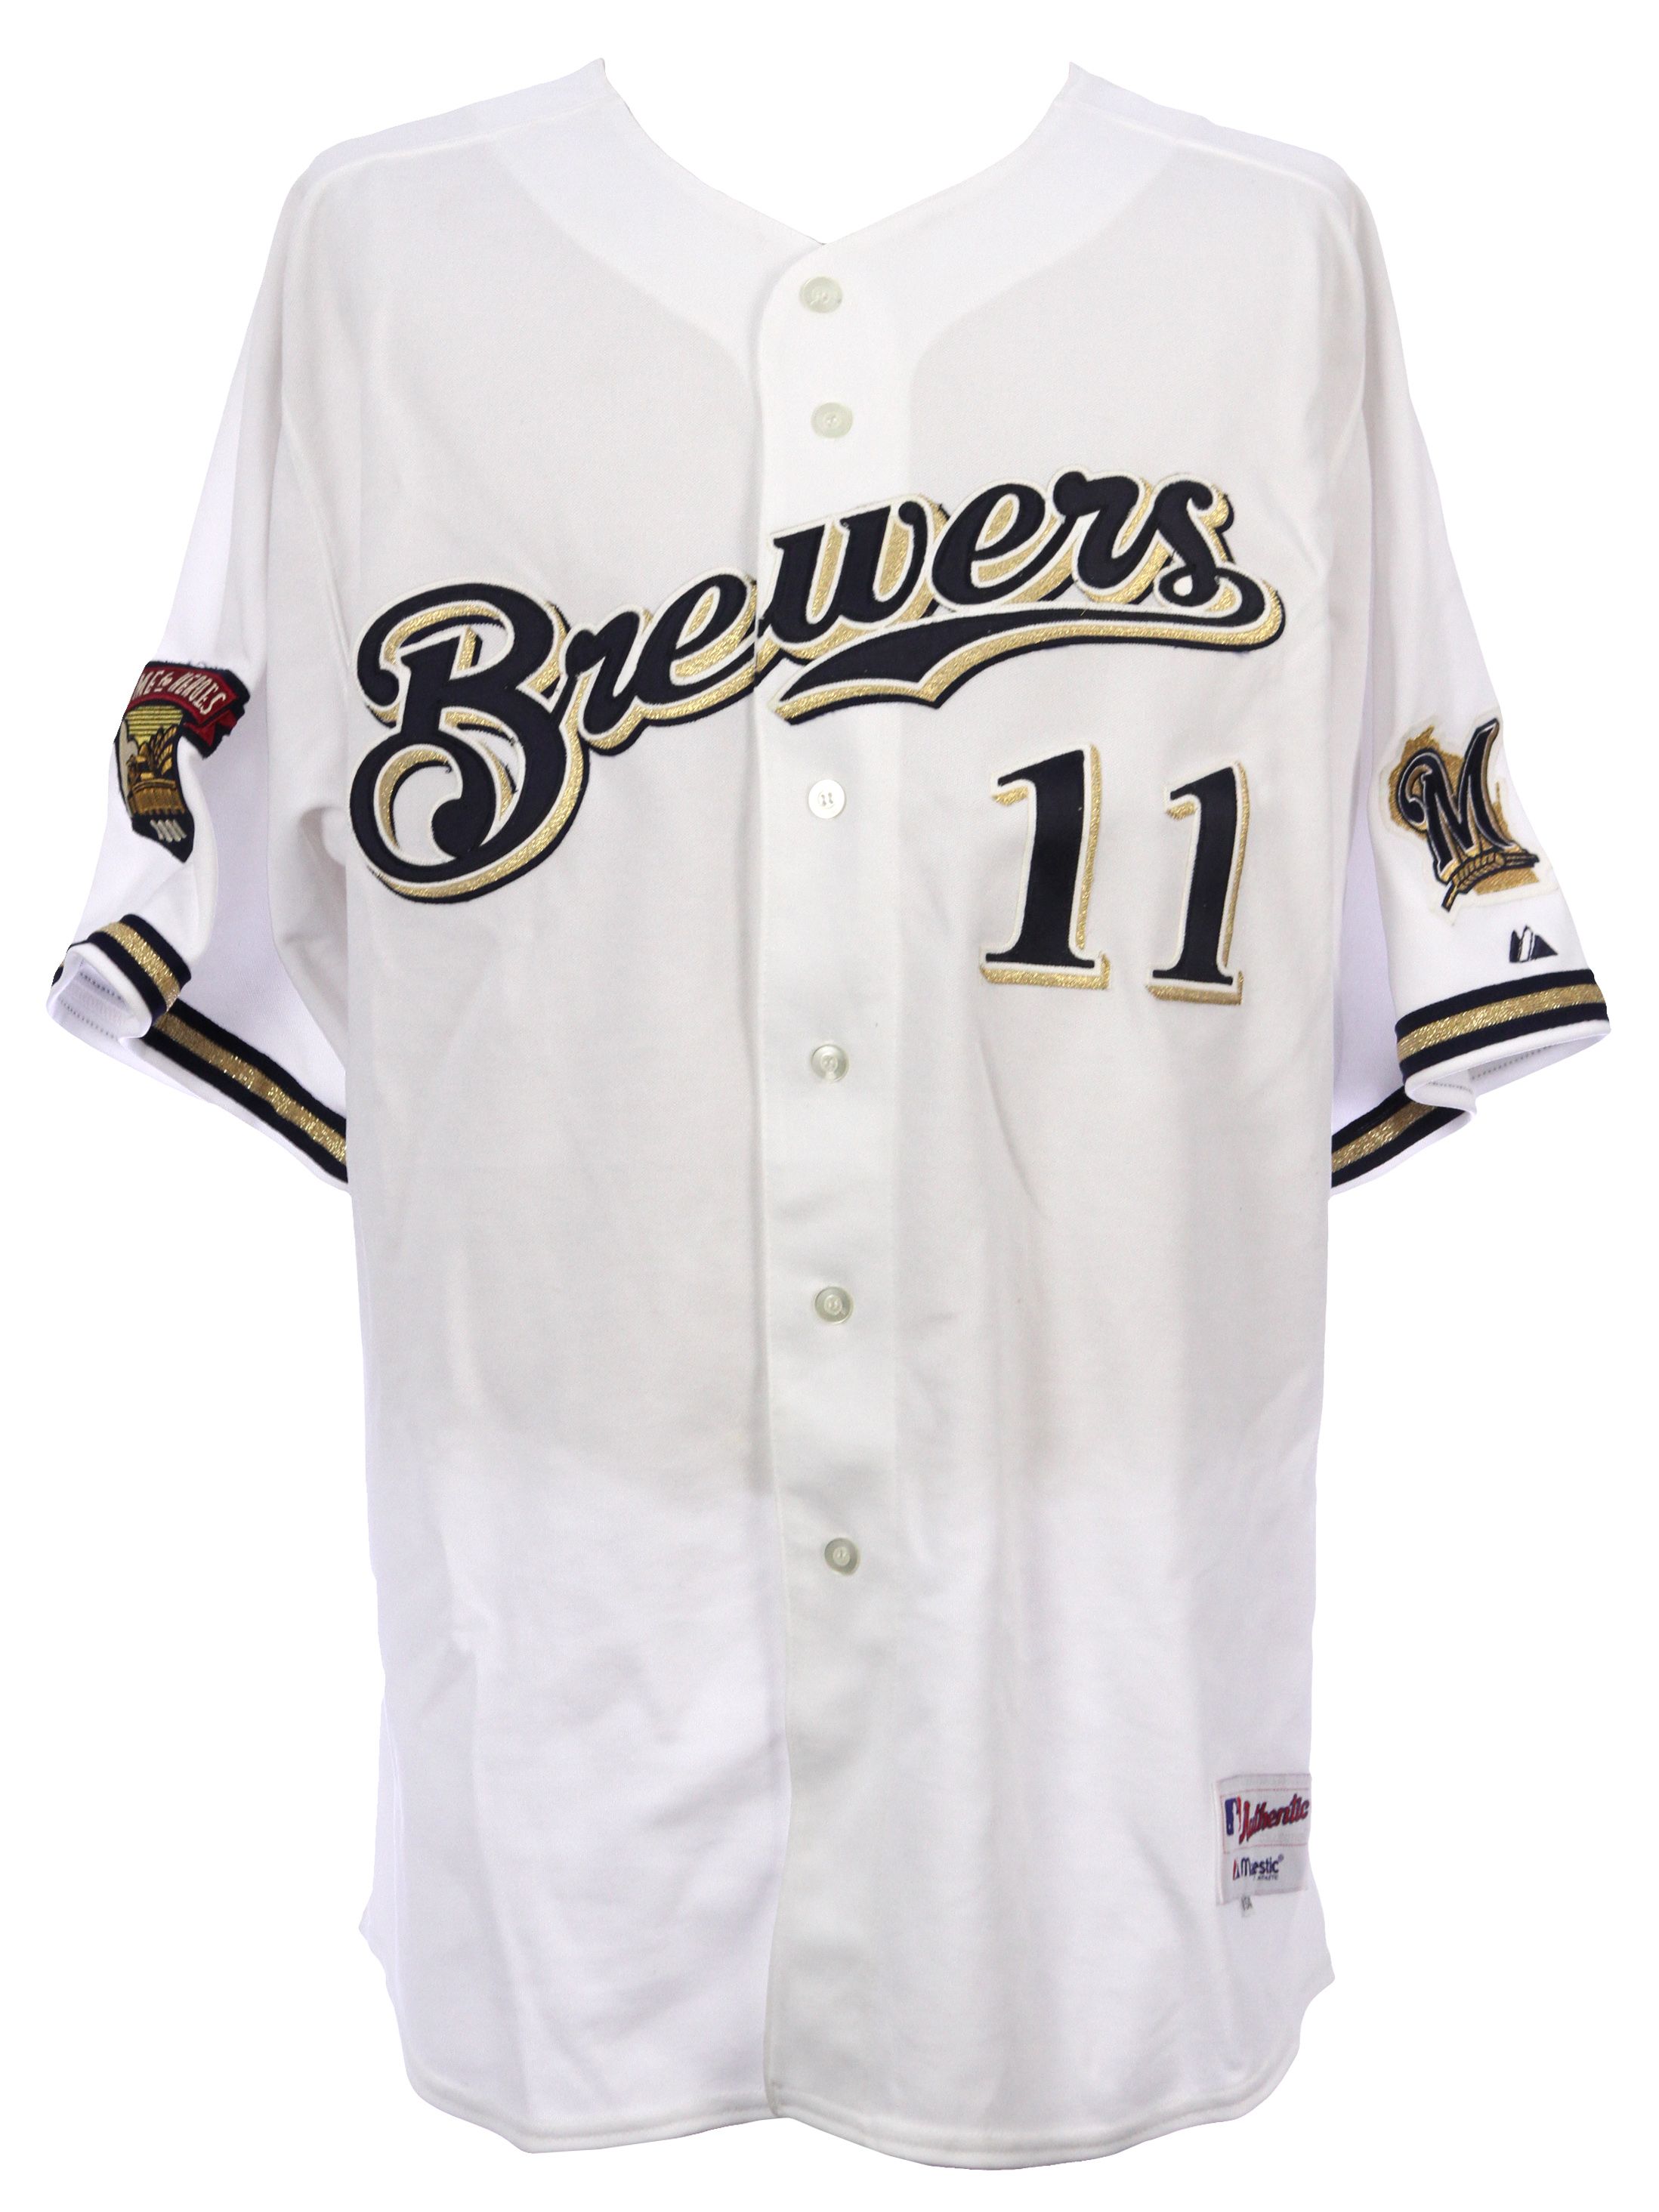 milwaukee brewers jersey patches